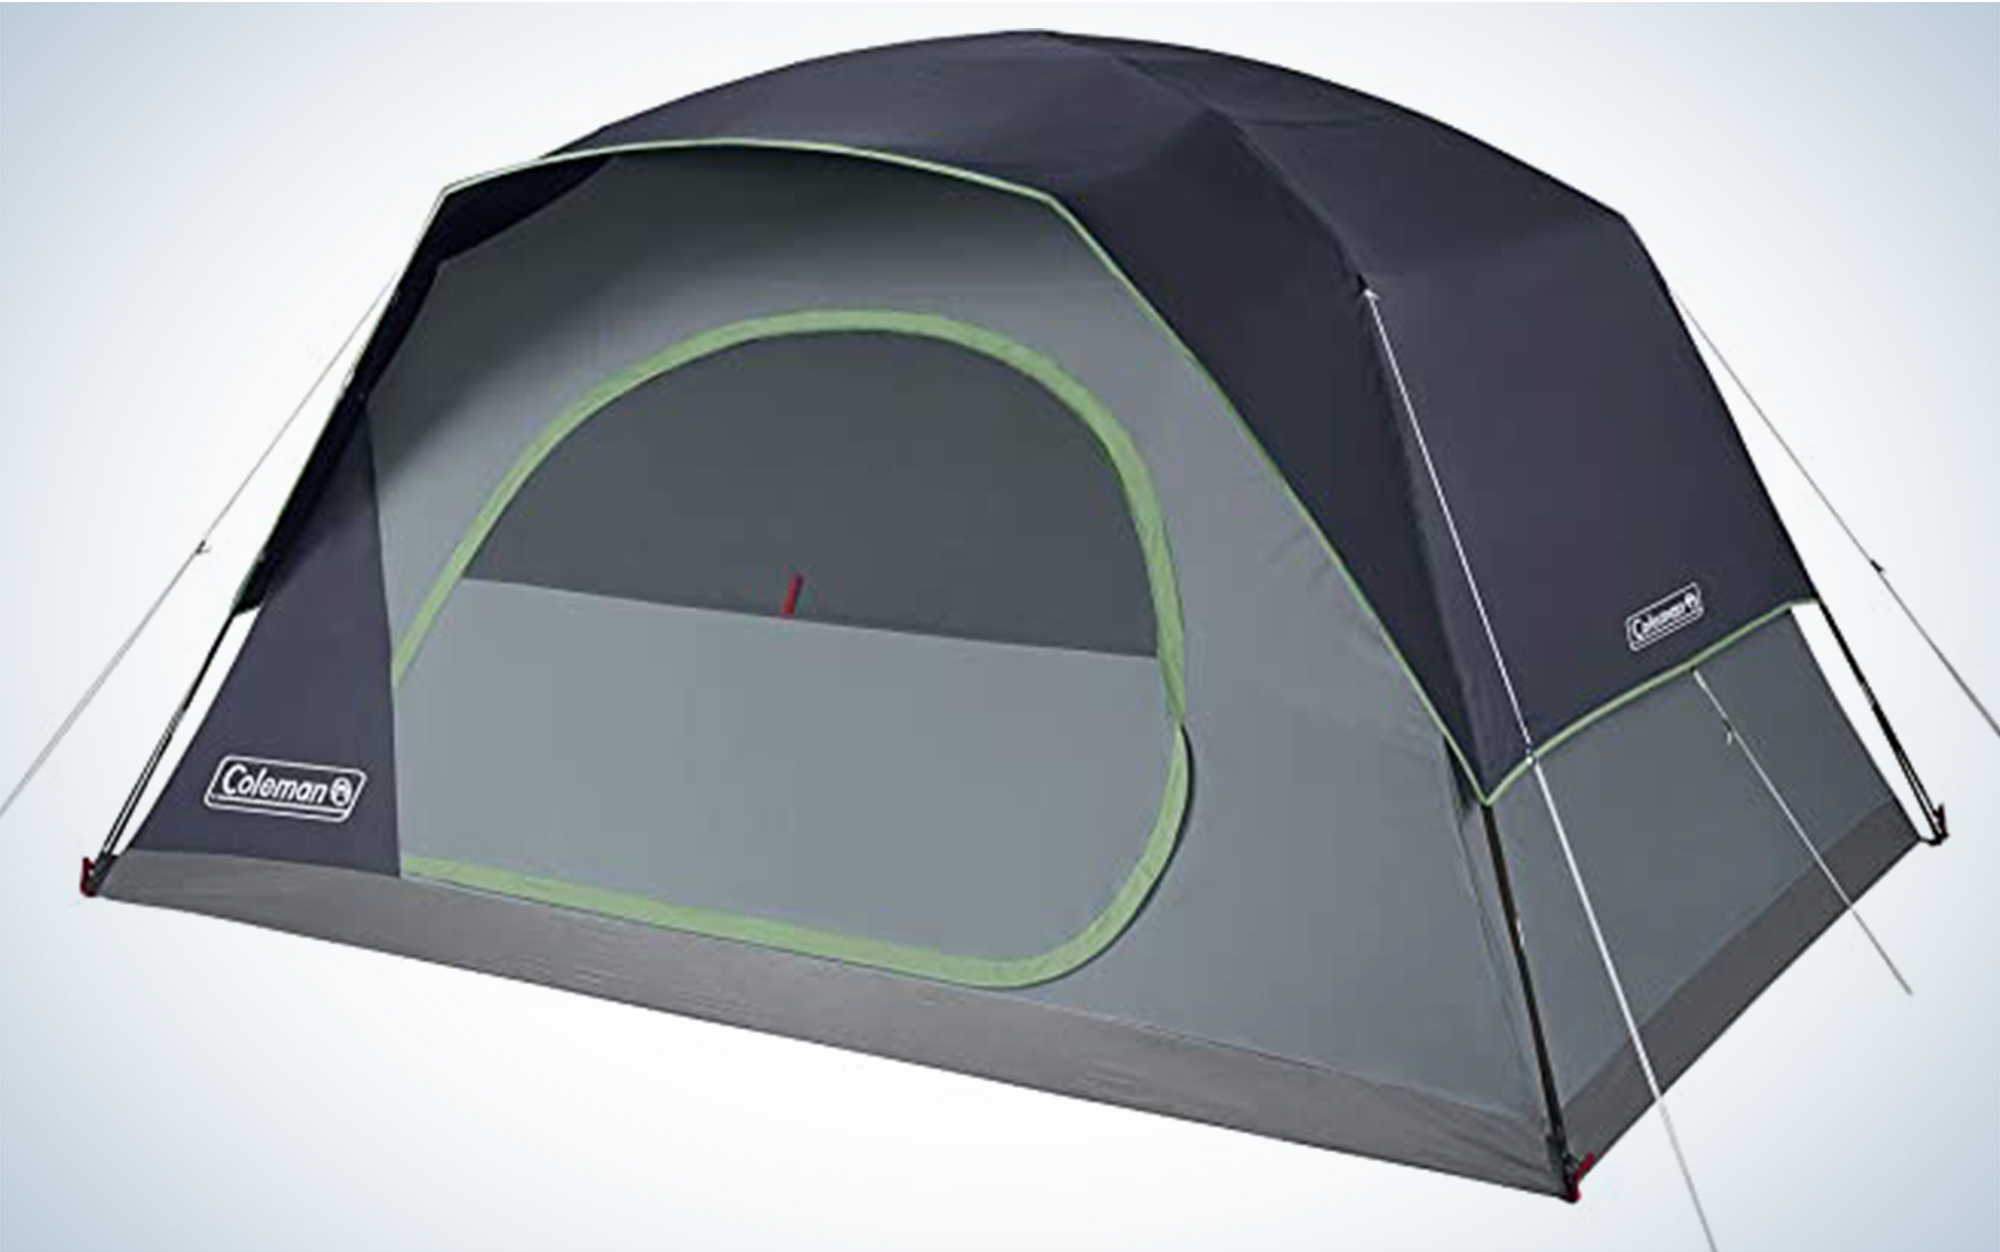 The Coleman Skydome is one of the best camping tents.